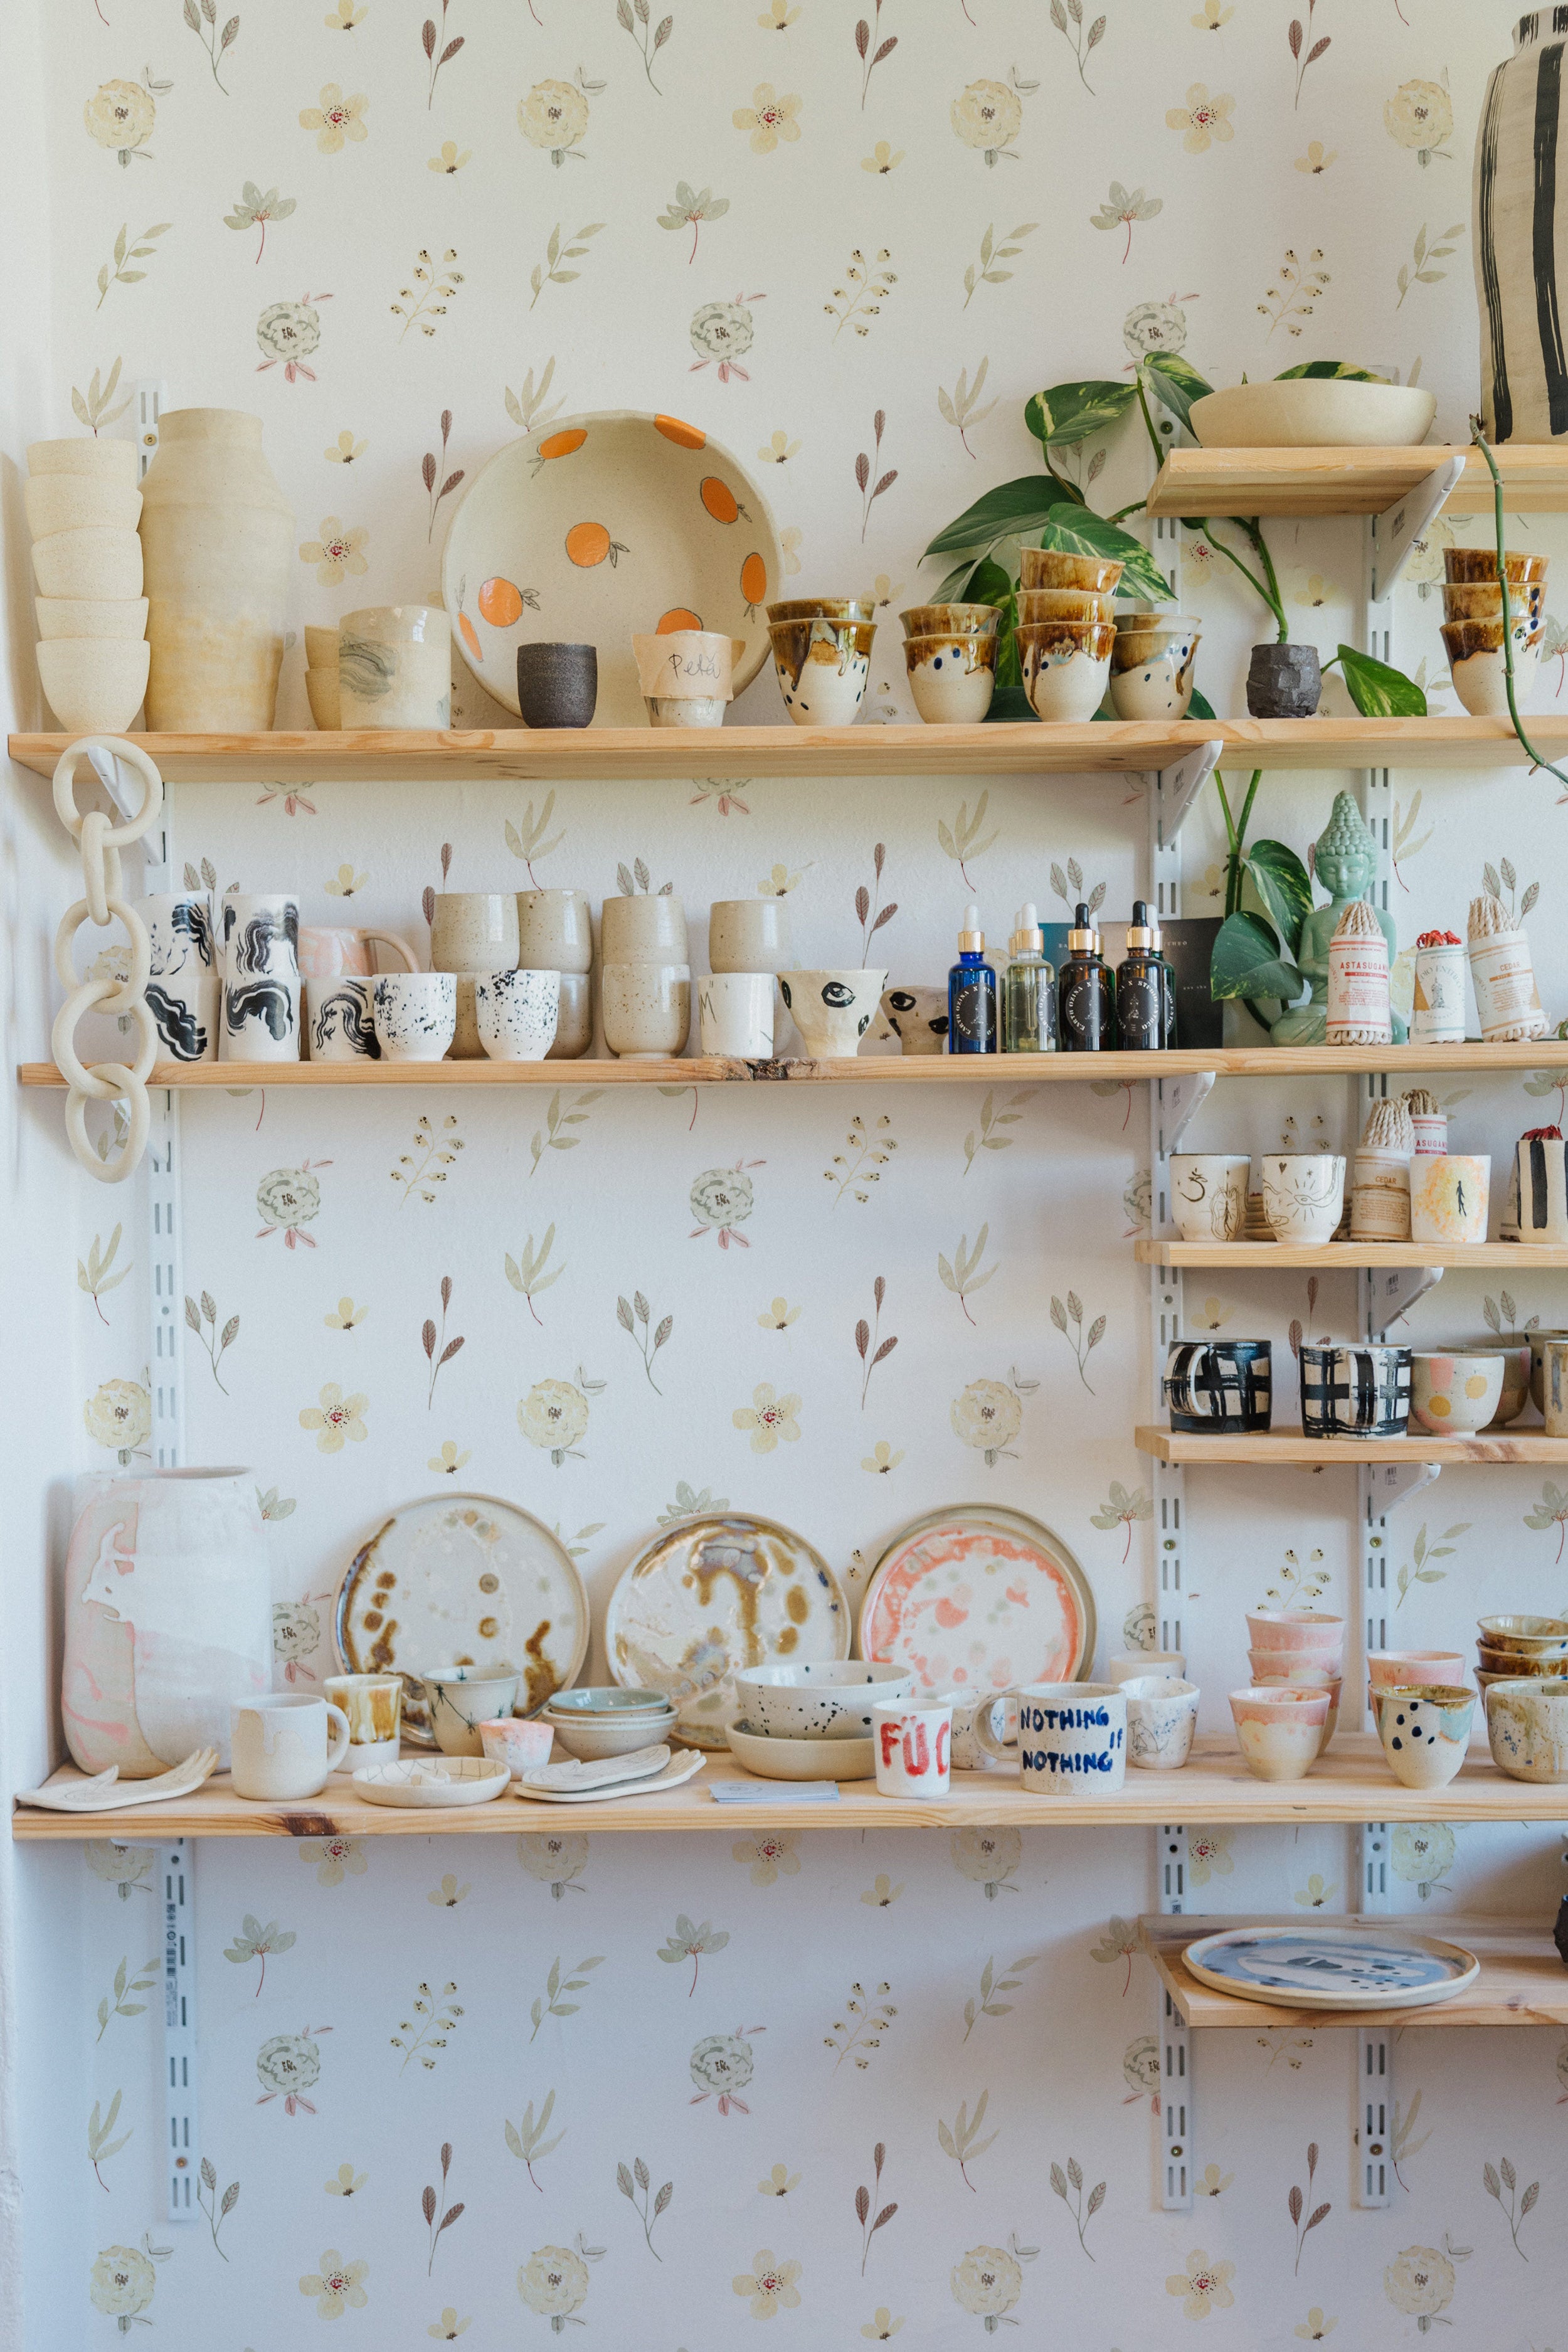 A lively and bright kitchen space with shelves of handcrafted pottery against the Sunny Floral Wallpaper, creating a homey and inviting atmosphere.